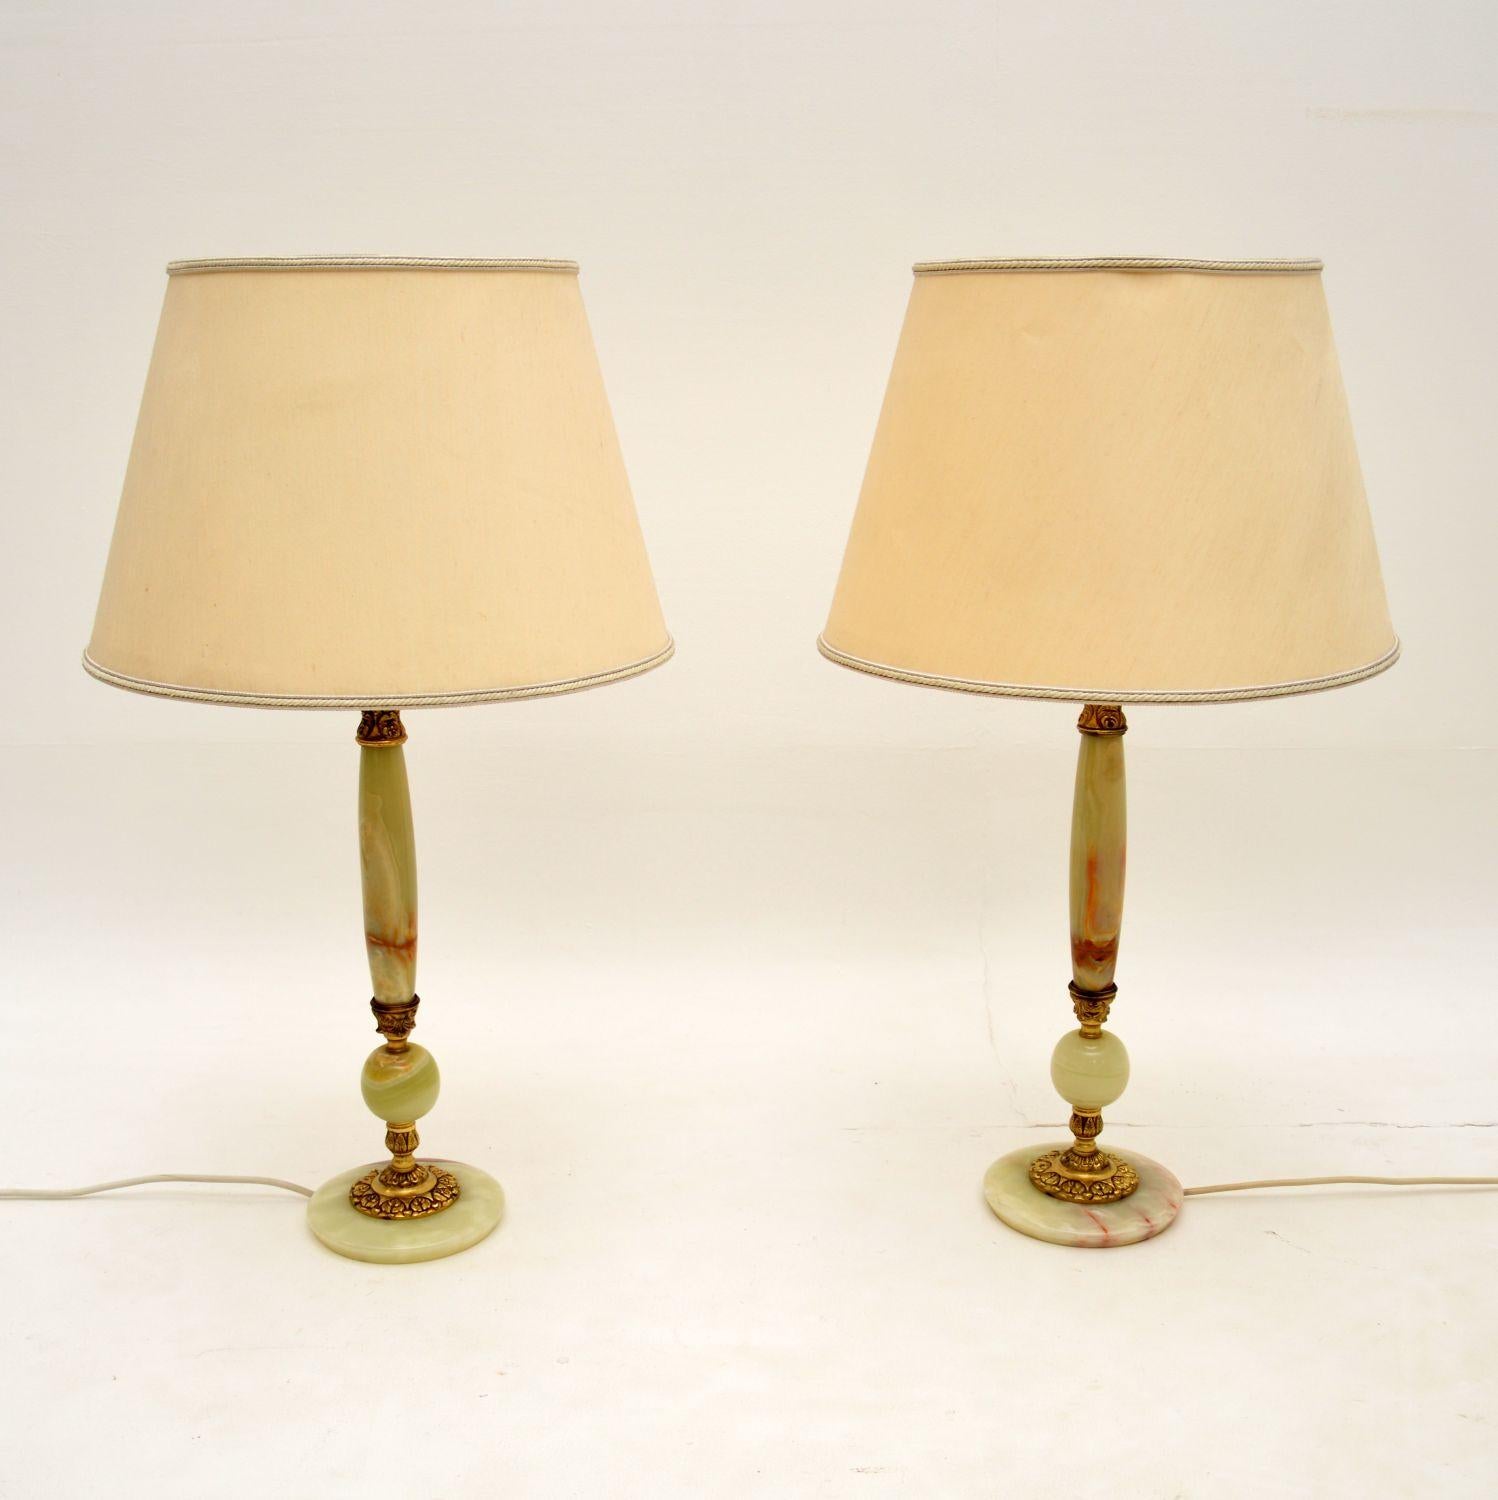 A beautiful pair of vintage table lamps in the antique French style. This were made in England, they date from around the 1930-50’s.

They are of very high quality, the onyx is beautifully coloured and they are joined together with high quality